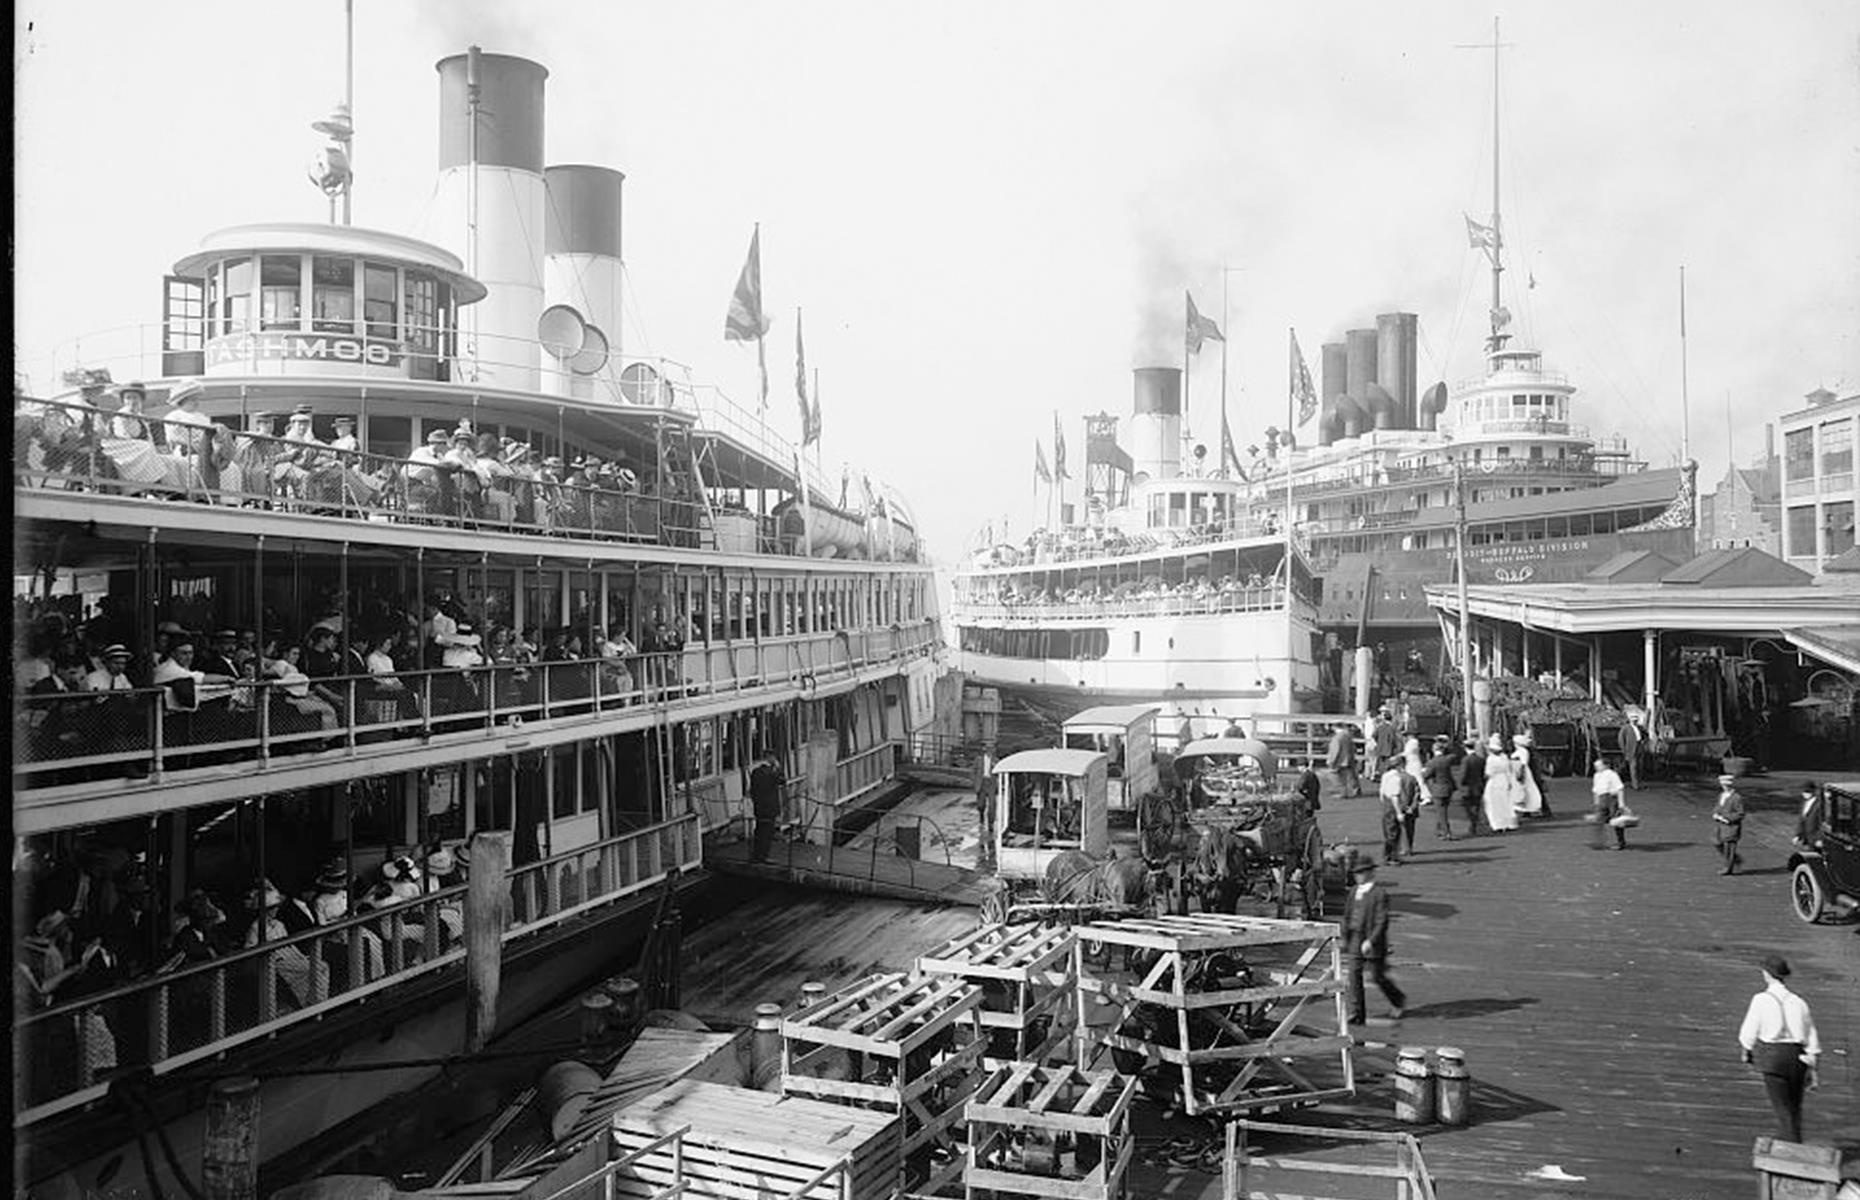 <p>At the turn of the century, there was still a frisson around cruising and large, buzzy crowds would often gather to see off the ships. This nostalgic photograph was snapped between 1900 and 1915, and shows large steam boats leaving from the White Star Line dock in Detroit, Michigan. Well-dressed passengers fill the ships' upper and lower decks too. <a href="https://www.loveexploring.com/galleries/67628/where-planes-trains-cruise-ships-and-automobiles-go-to-die?page=1">Discover where planes, trains, cruise ships and cars go to die here</a>.</p>